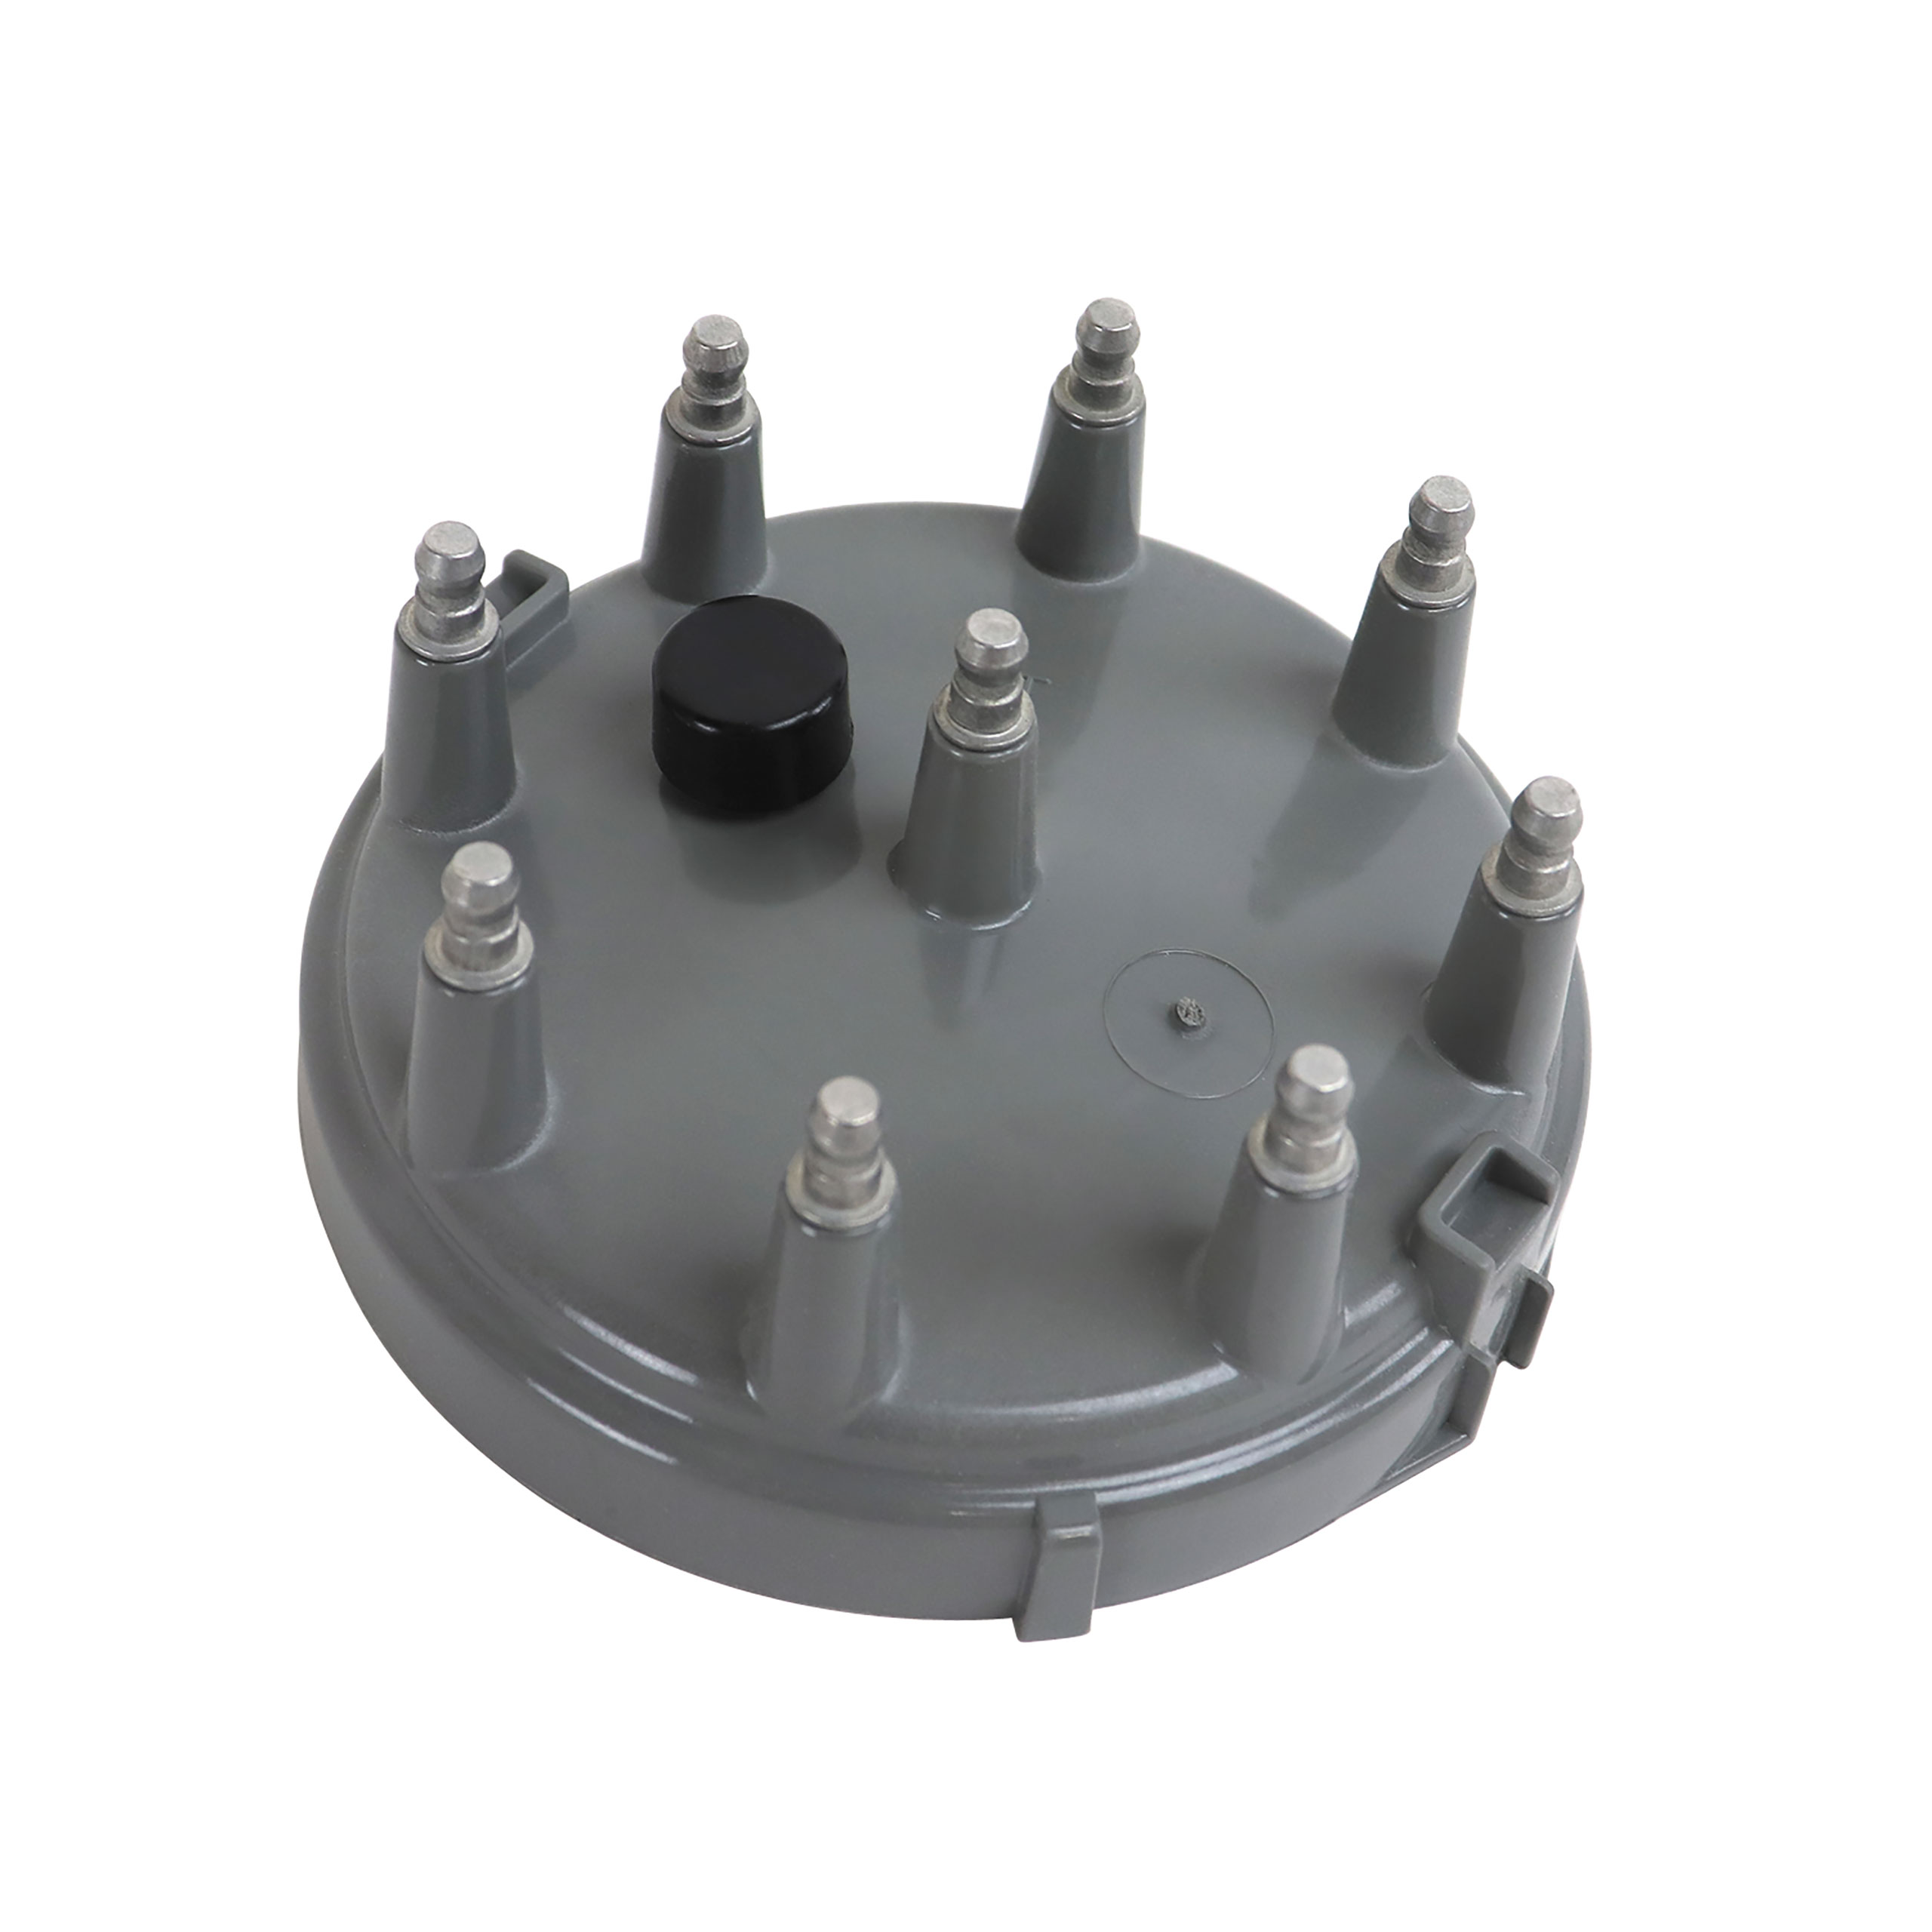 Fourth Generation 1995 Ford Mustang MOTORCRAFT DISTRIBUTOR CAP 95 5.0L - Auto Accessories of America